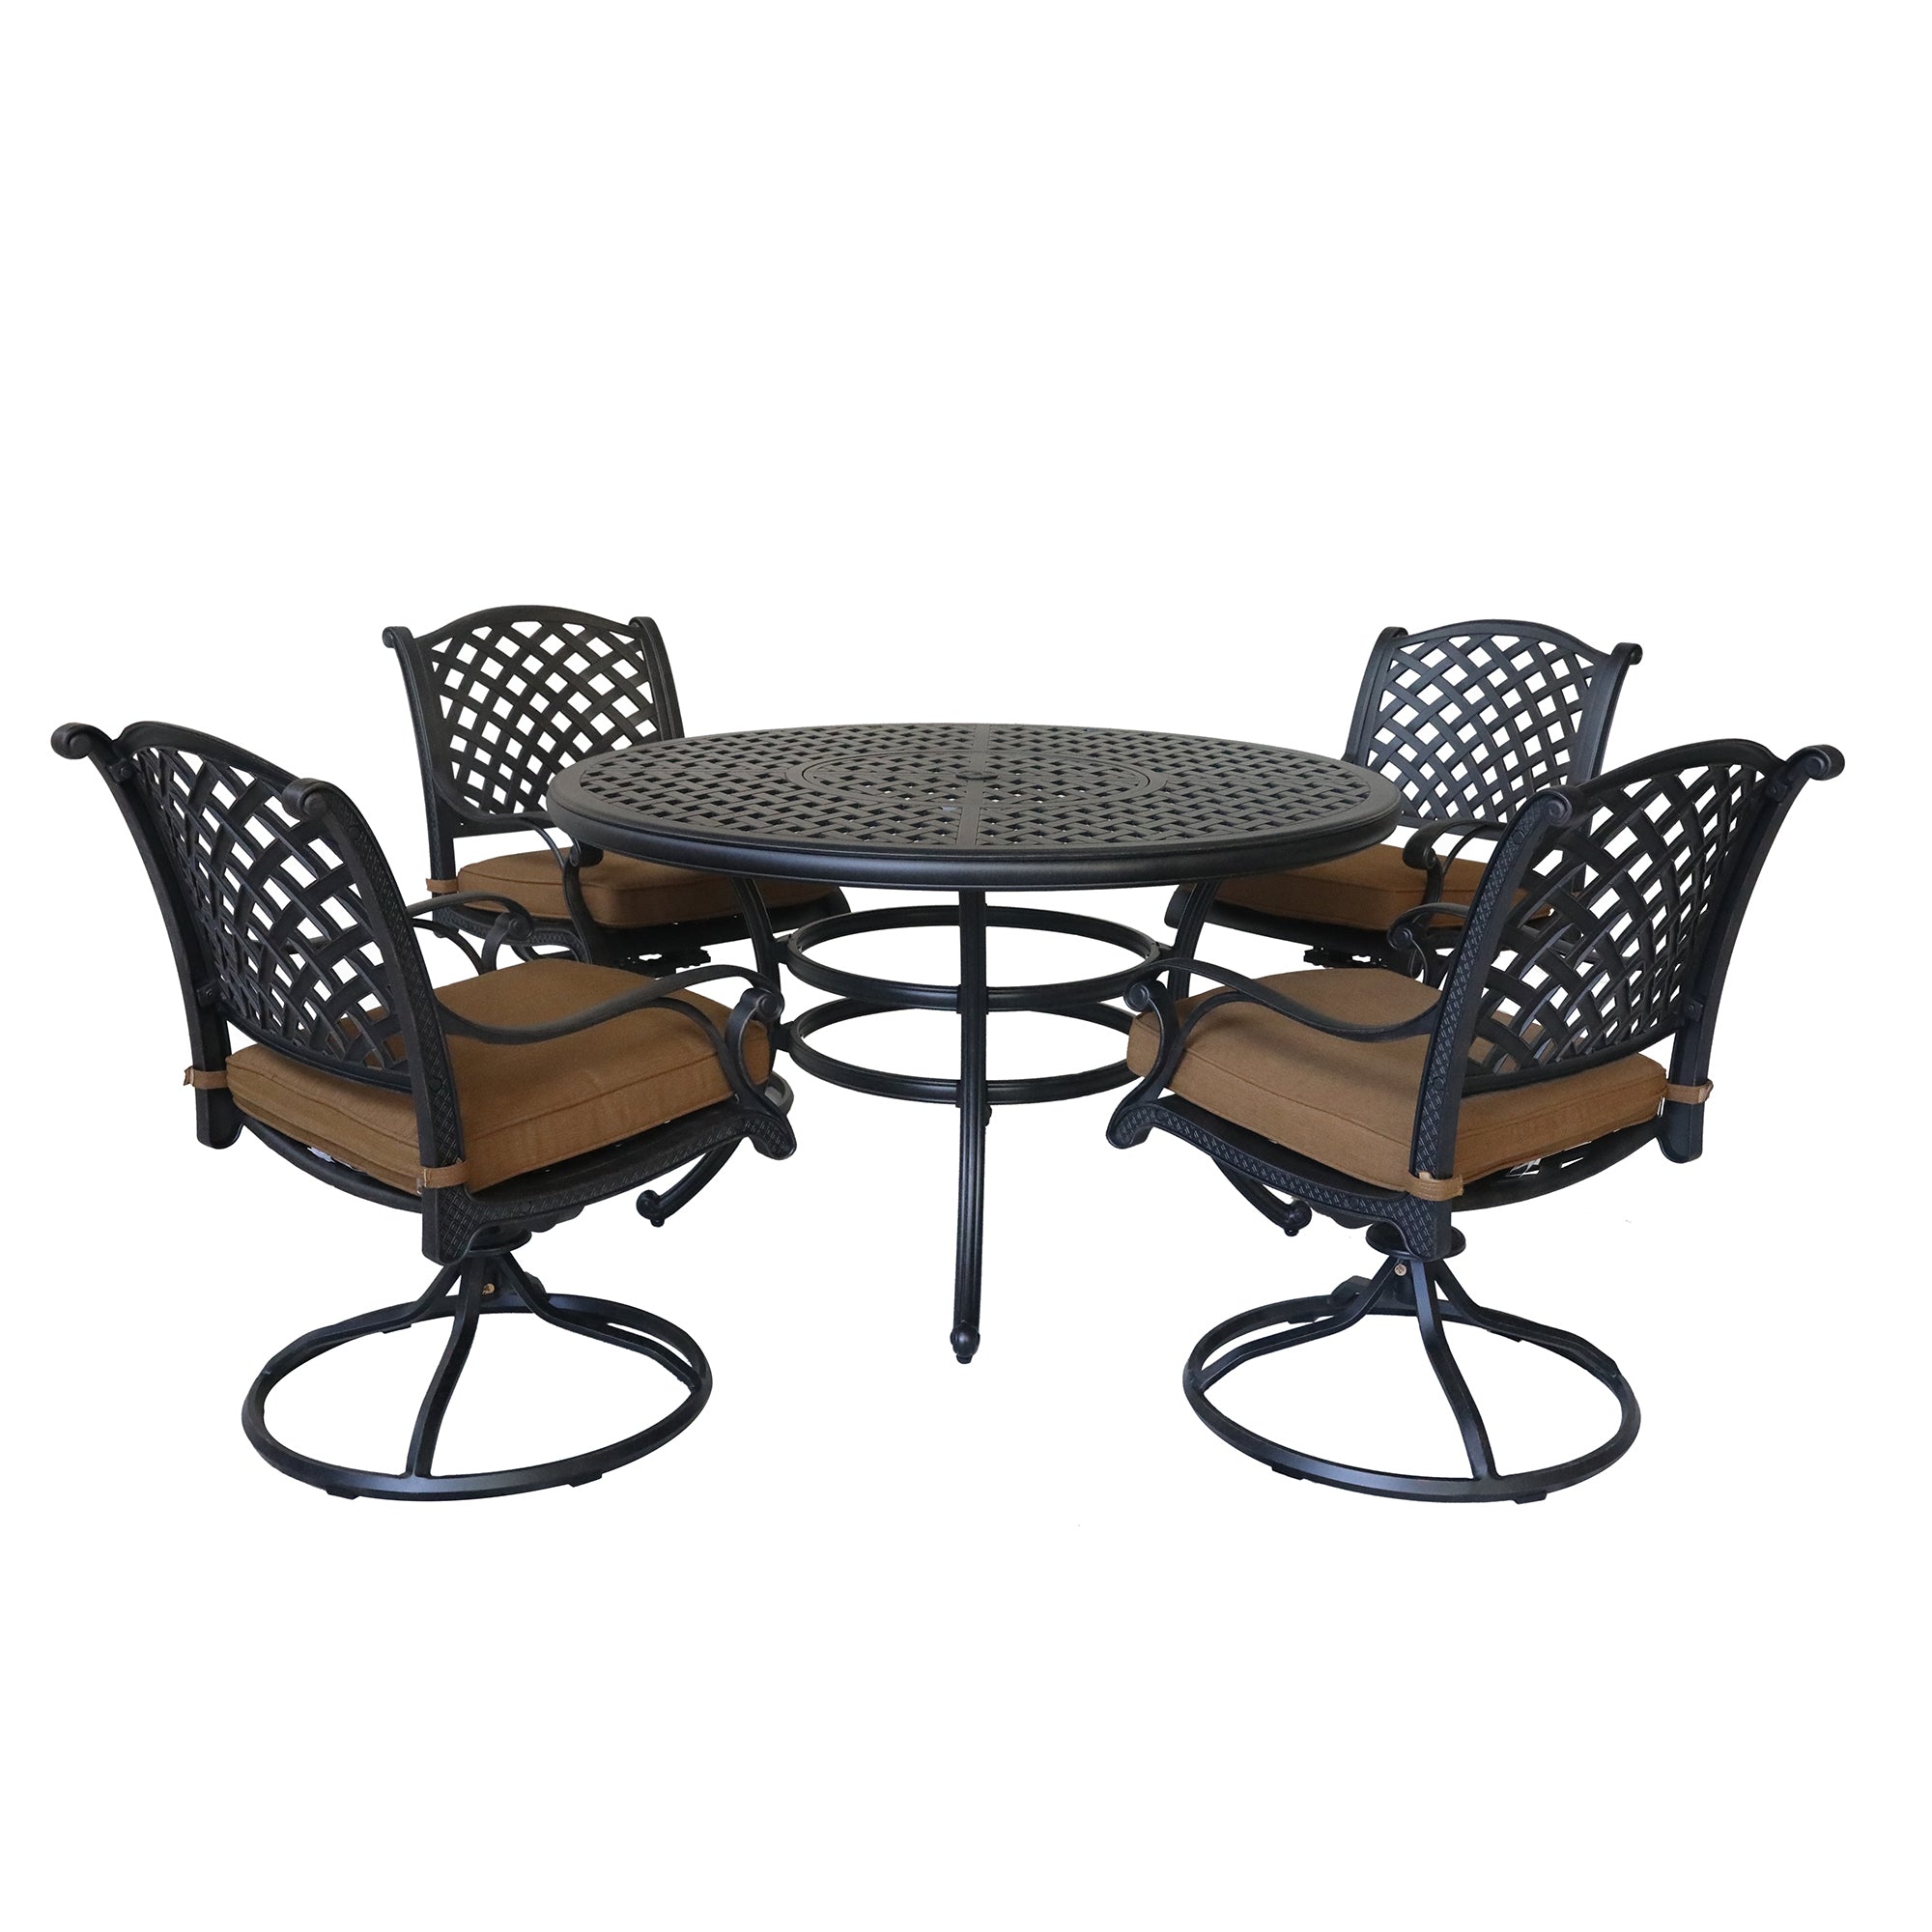 Round 4 Person 52" Long Dining Set with Cushions, antique brown-polyester-aluminum